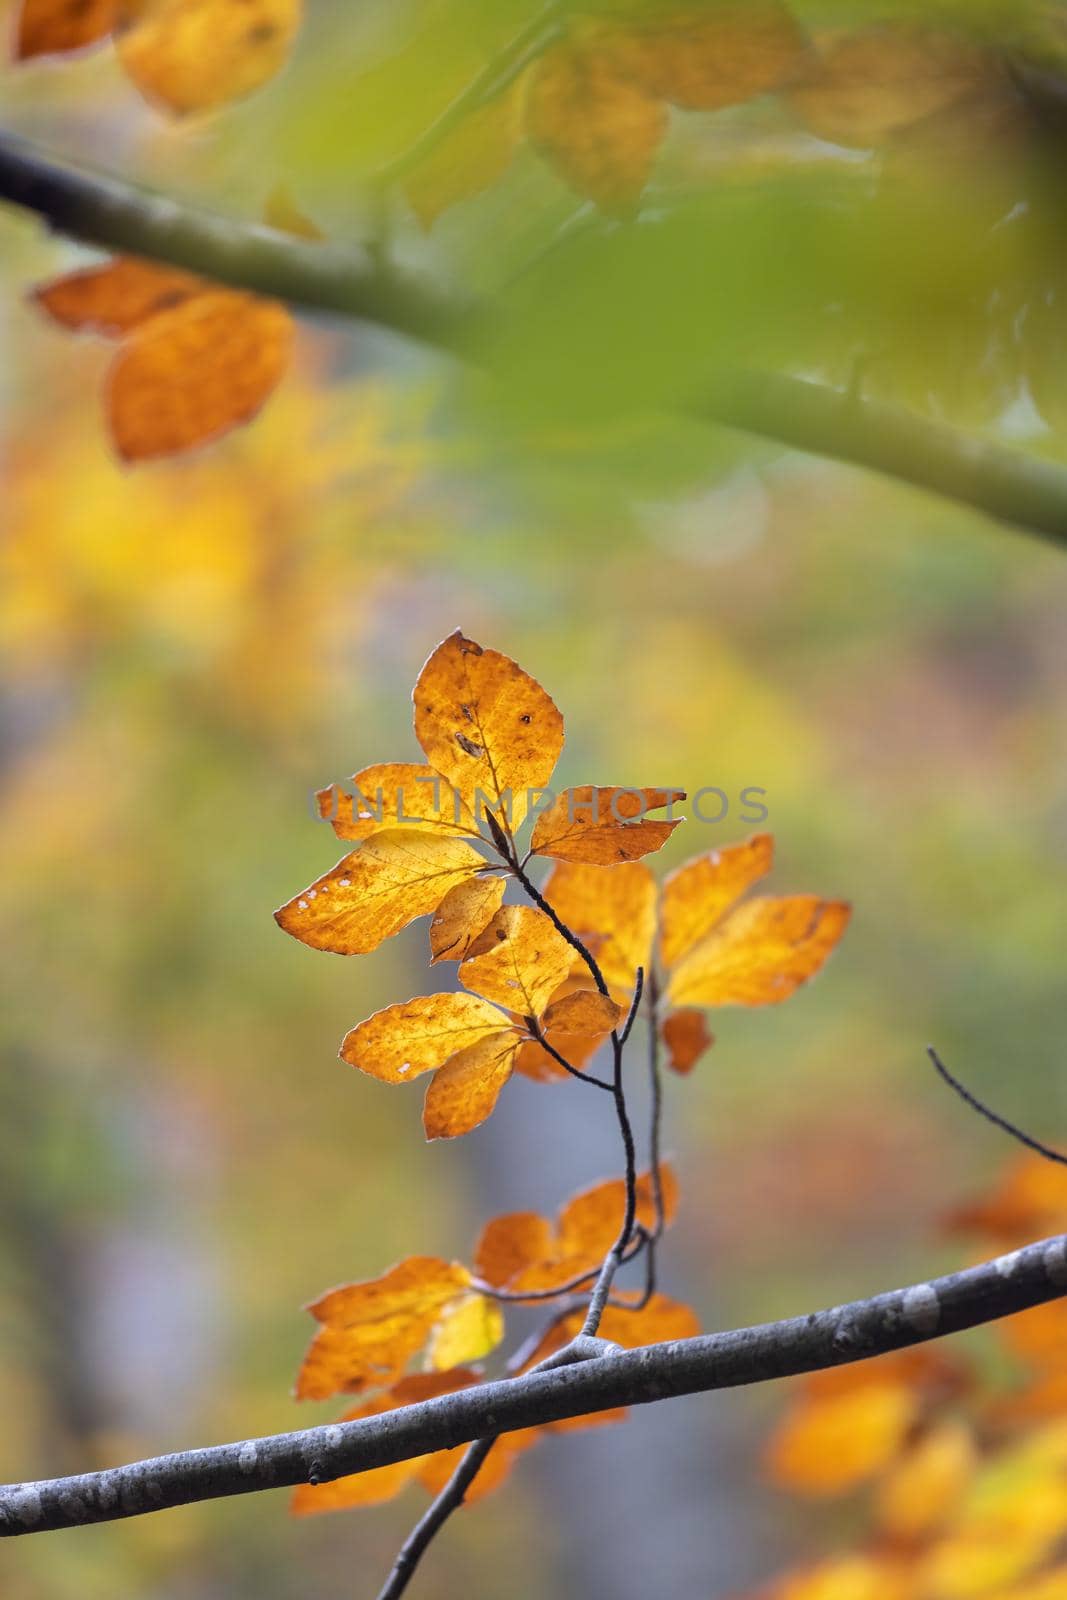 Autumn beech leaves, decorate a beautiful nature background by Digoarpi